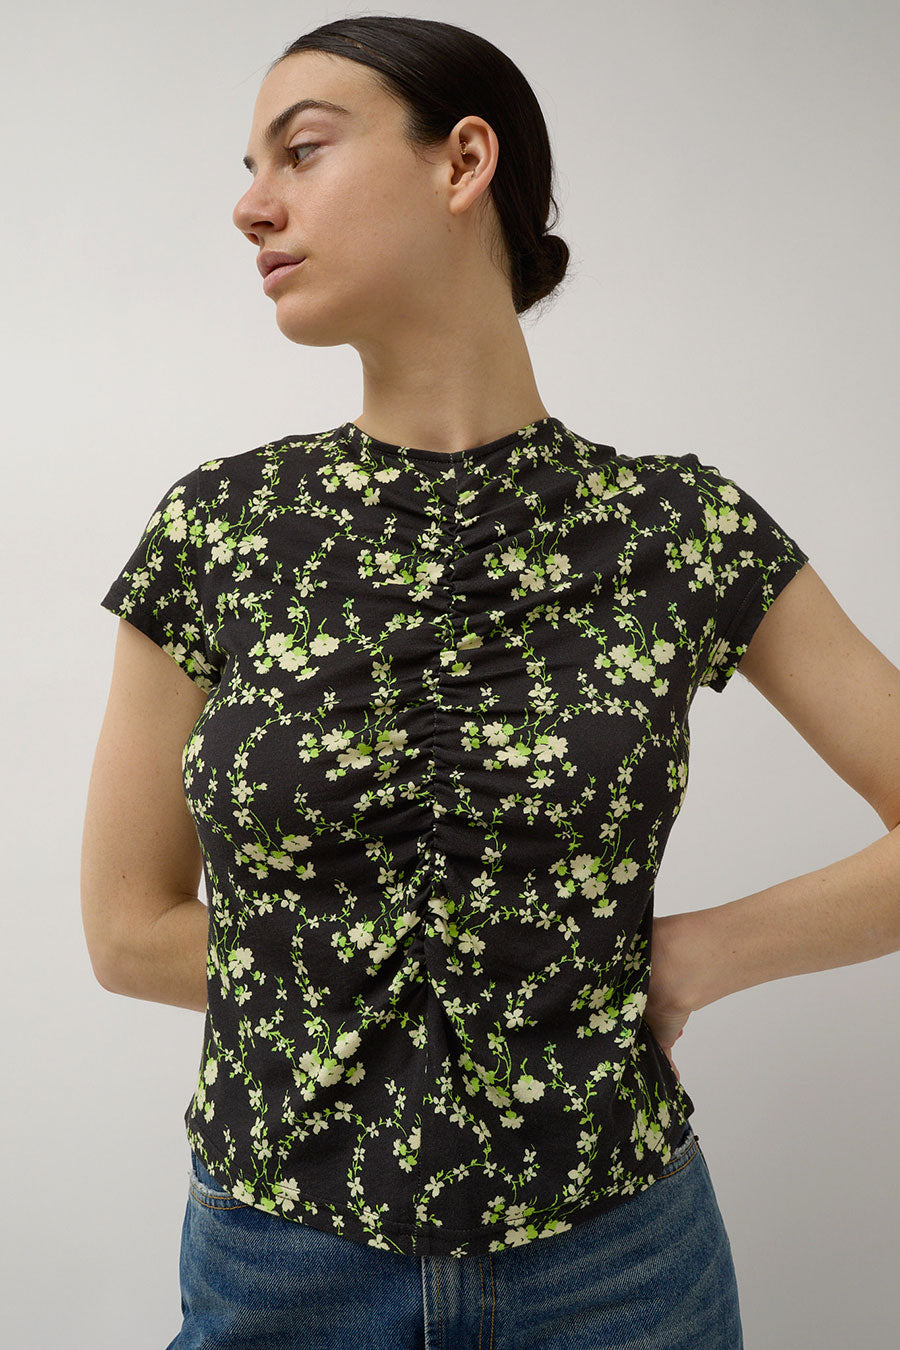 No.6 Tara Top in Black and Lime Trellis